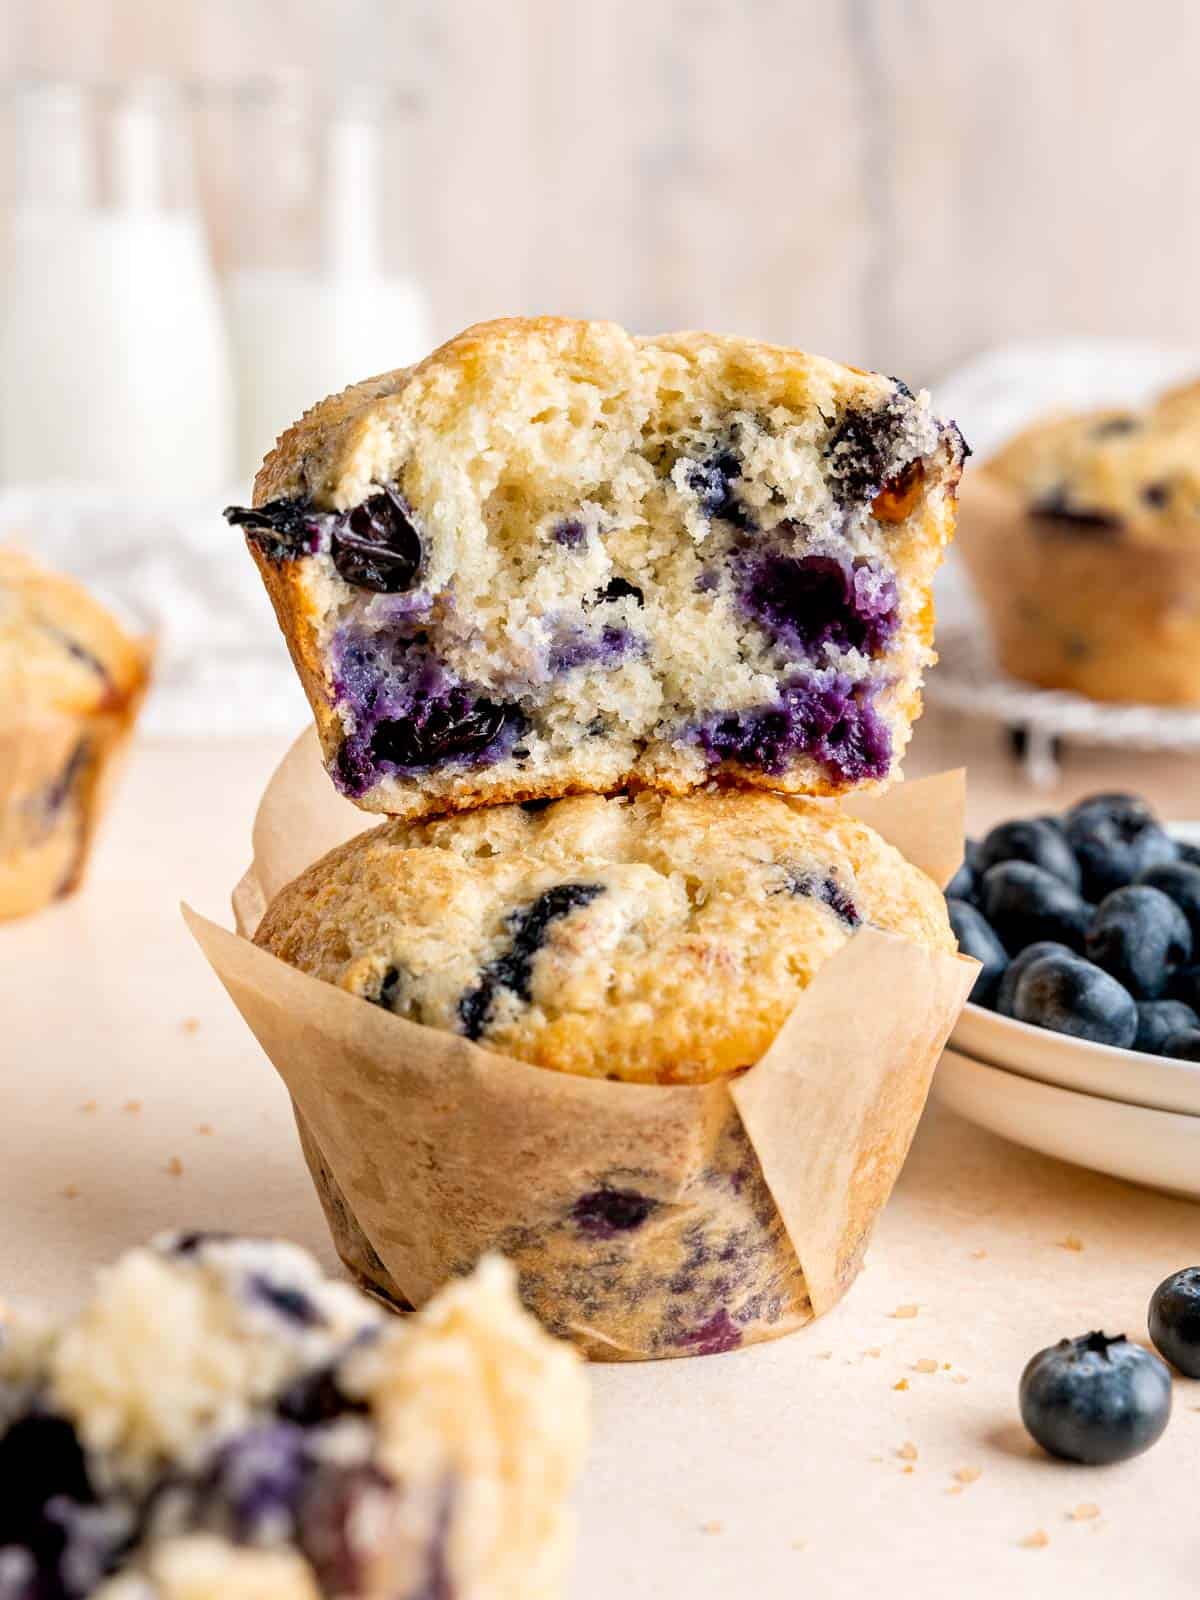 Half eaten sourdough discard jumbo blueberry muffin stacked on top of another one.